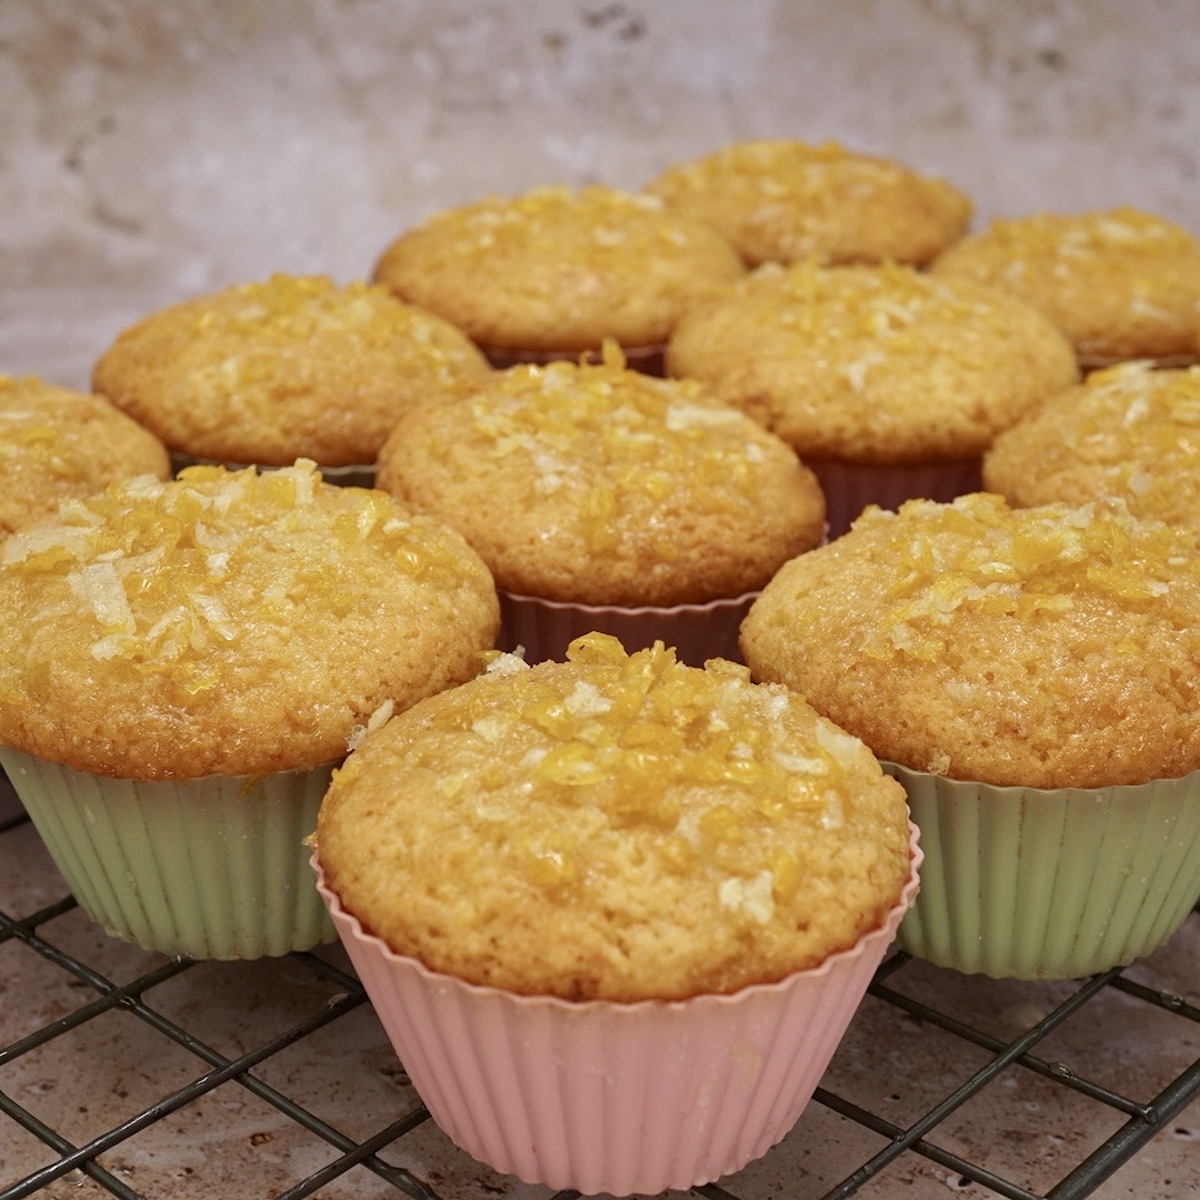 A group of lemon drizzle cupcakes.